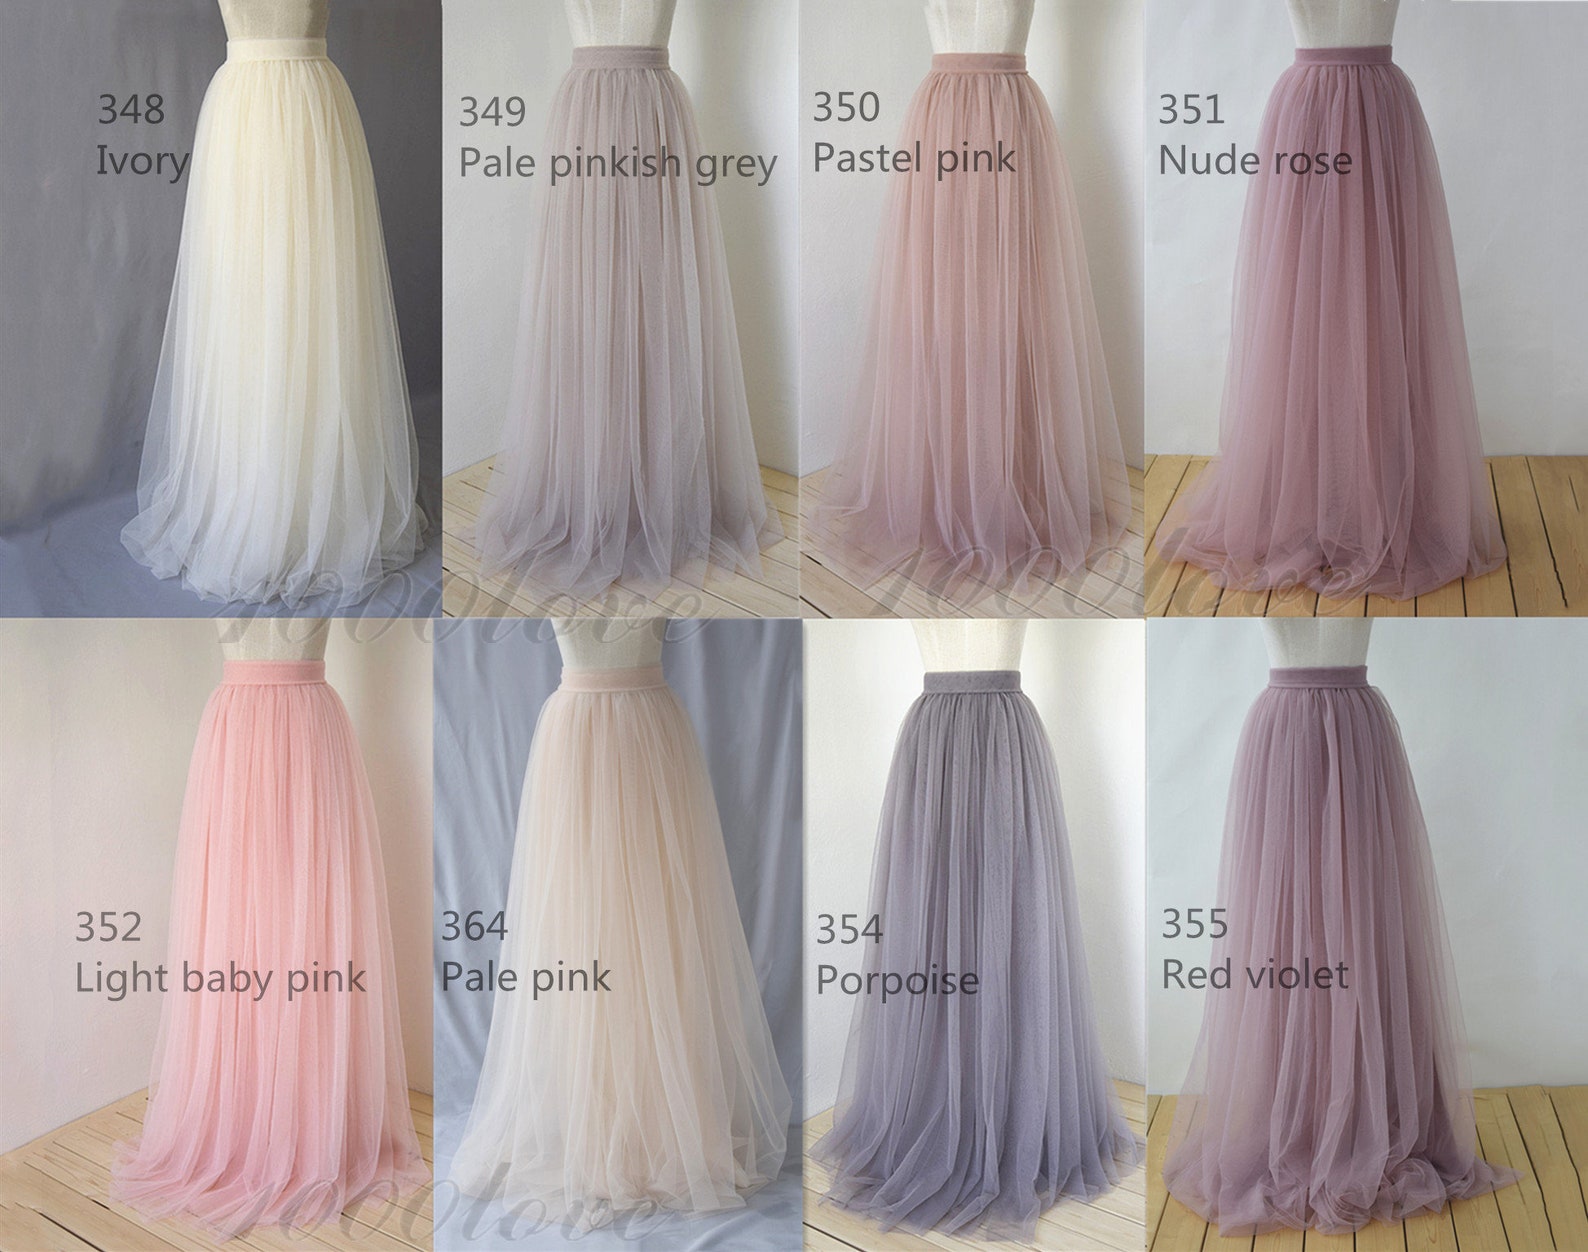 Adult softest tulle skirtMixture color long maxi tulle skirt | Etsy